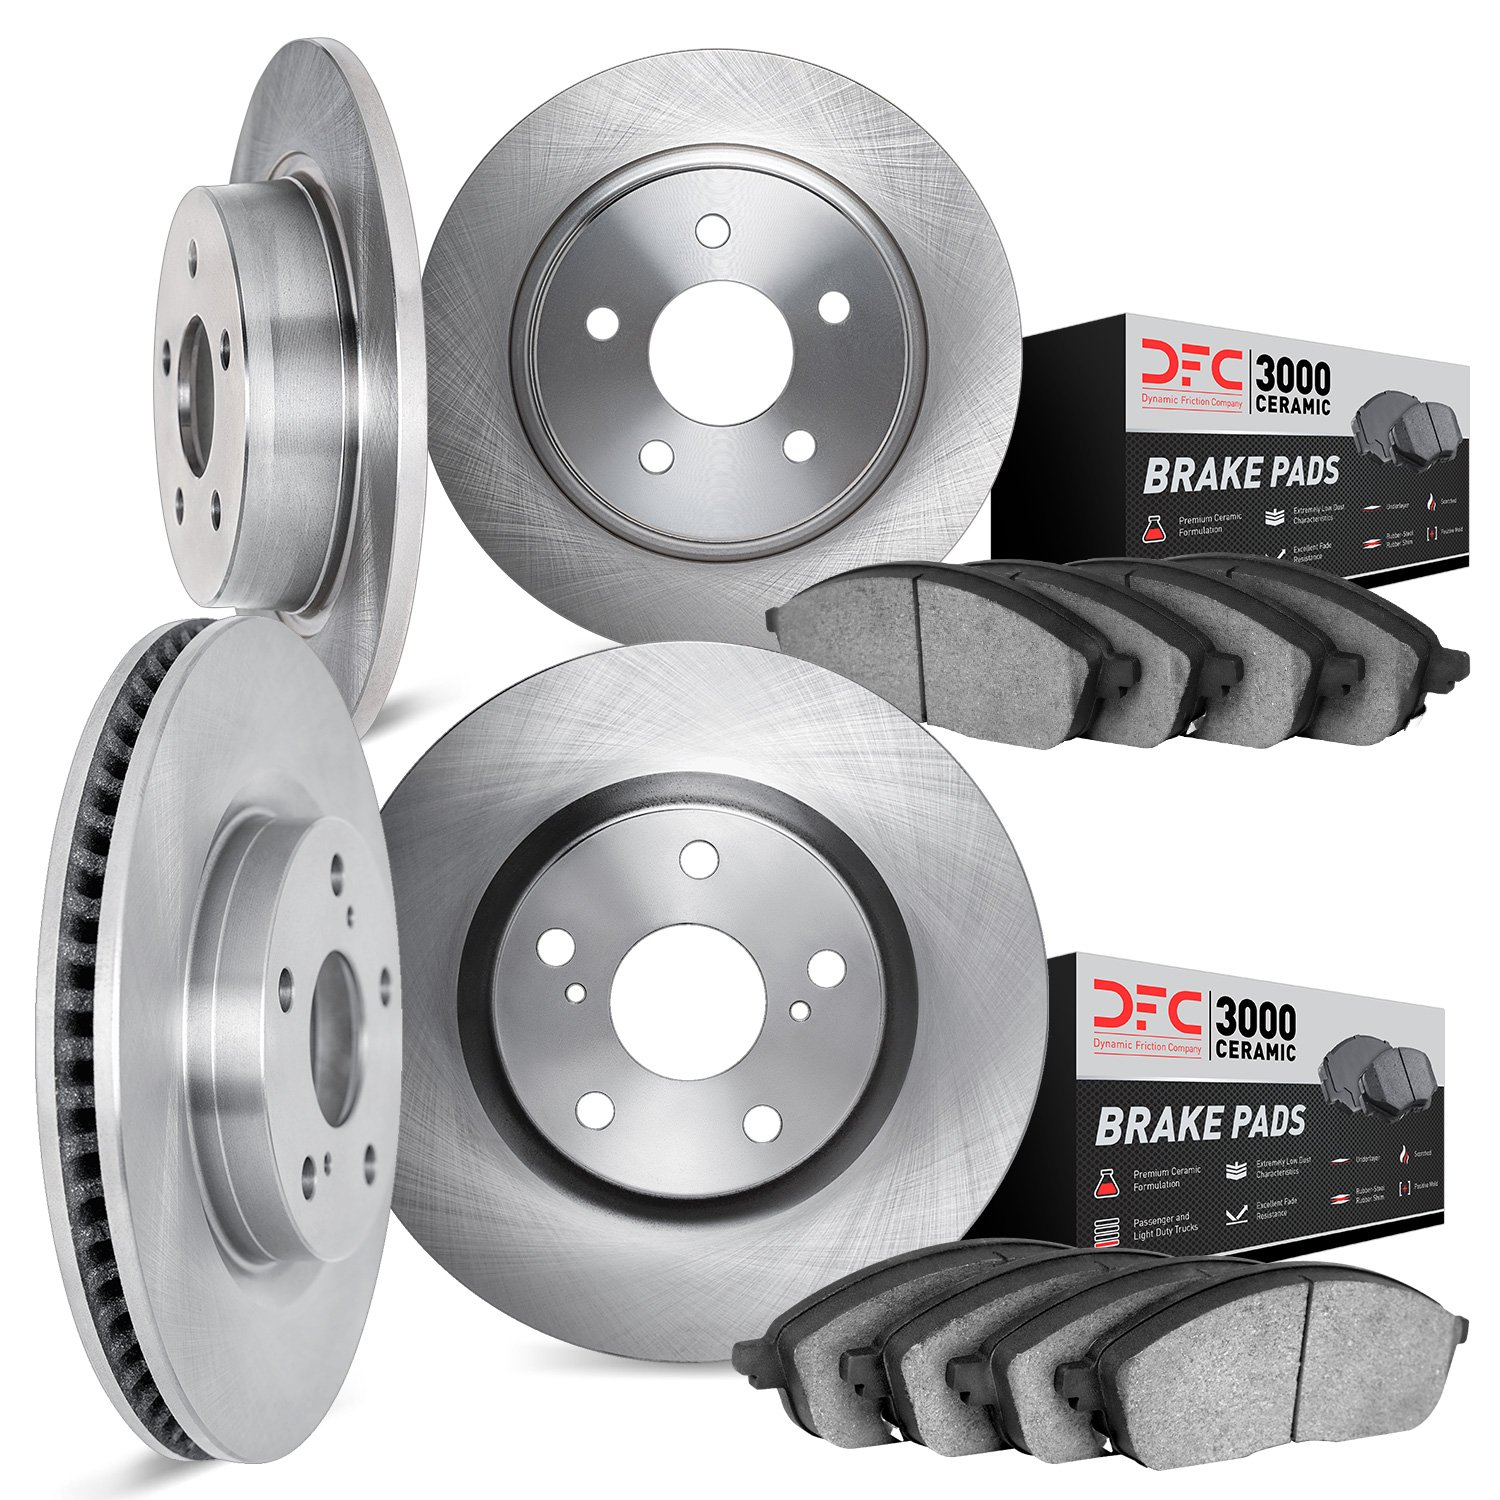 6304-40033 Brake Rotors with 3000-Series Ceramic Brake Pads Kit, Fits Select Mopar, Position: Front and Rear